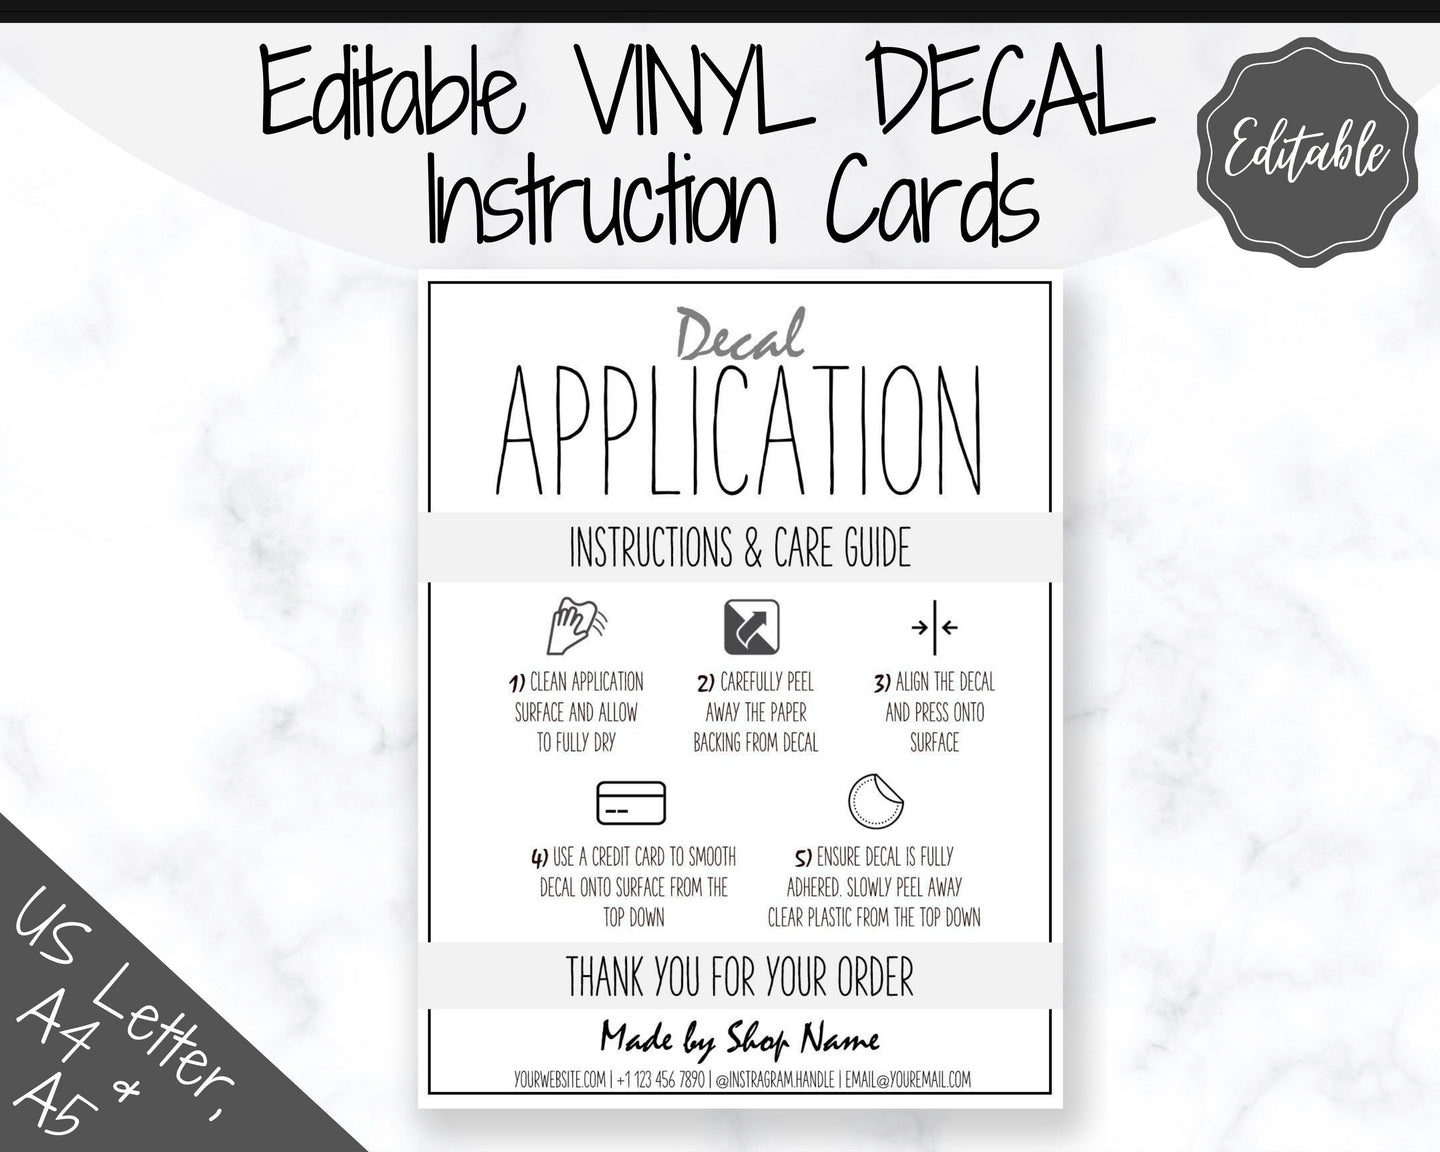 EDITABLE Vinyl Decal Care Card Instructions, Printable Decal Application Order Card, DIY Sticker Seller Packaging Label, Care Cards | Grey